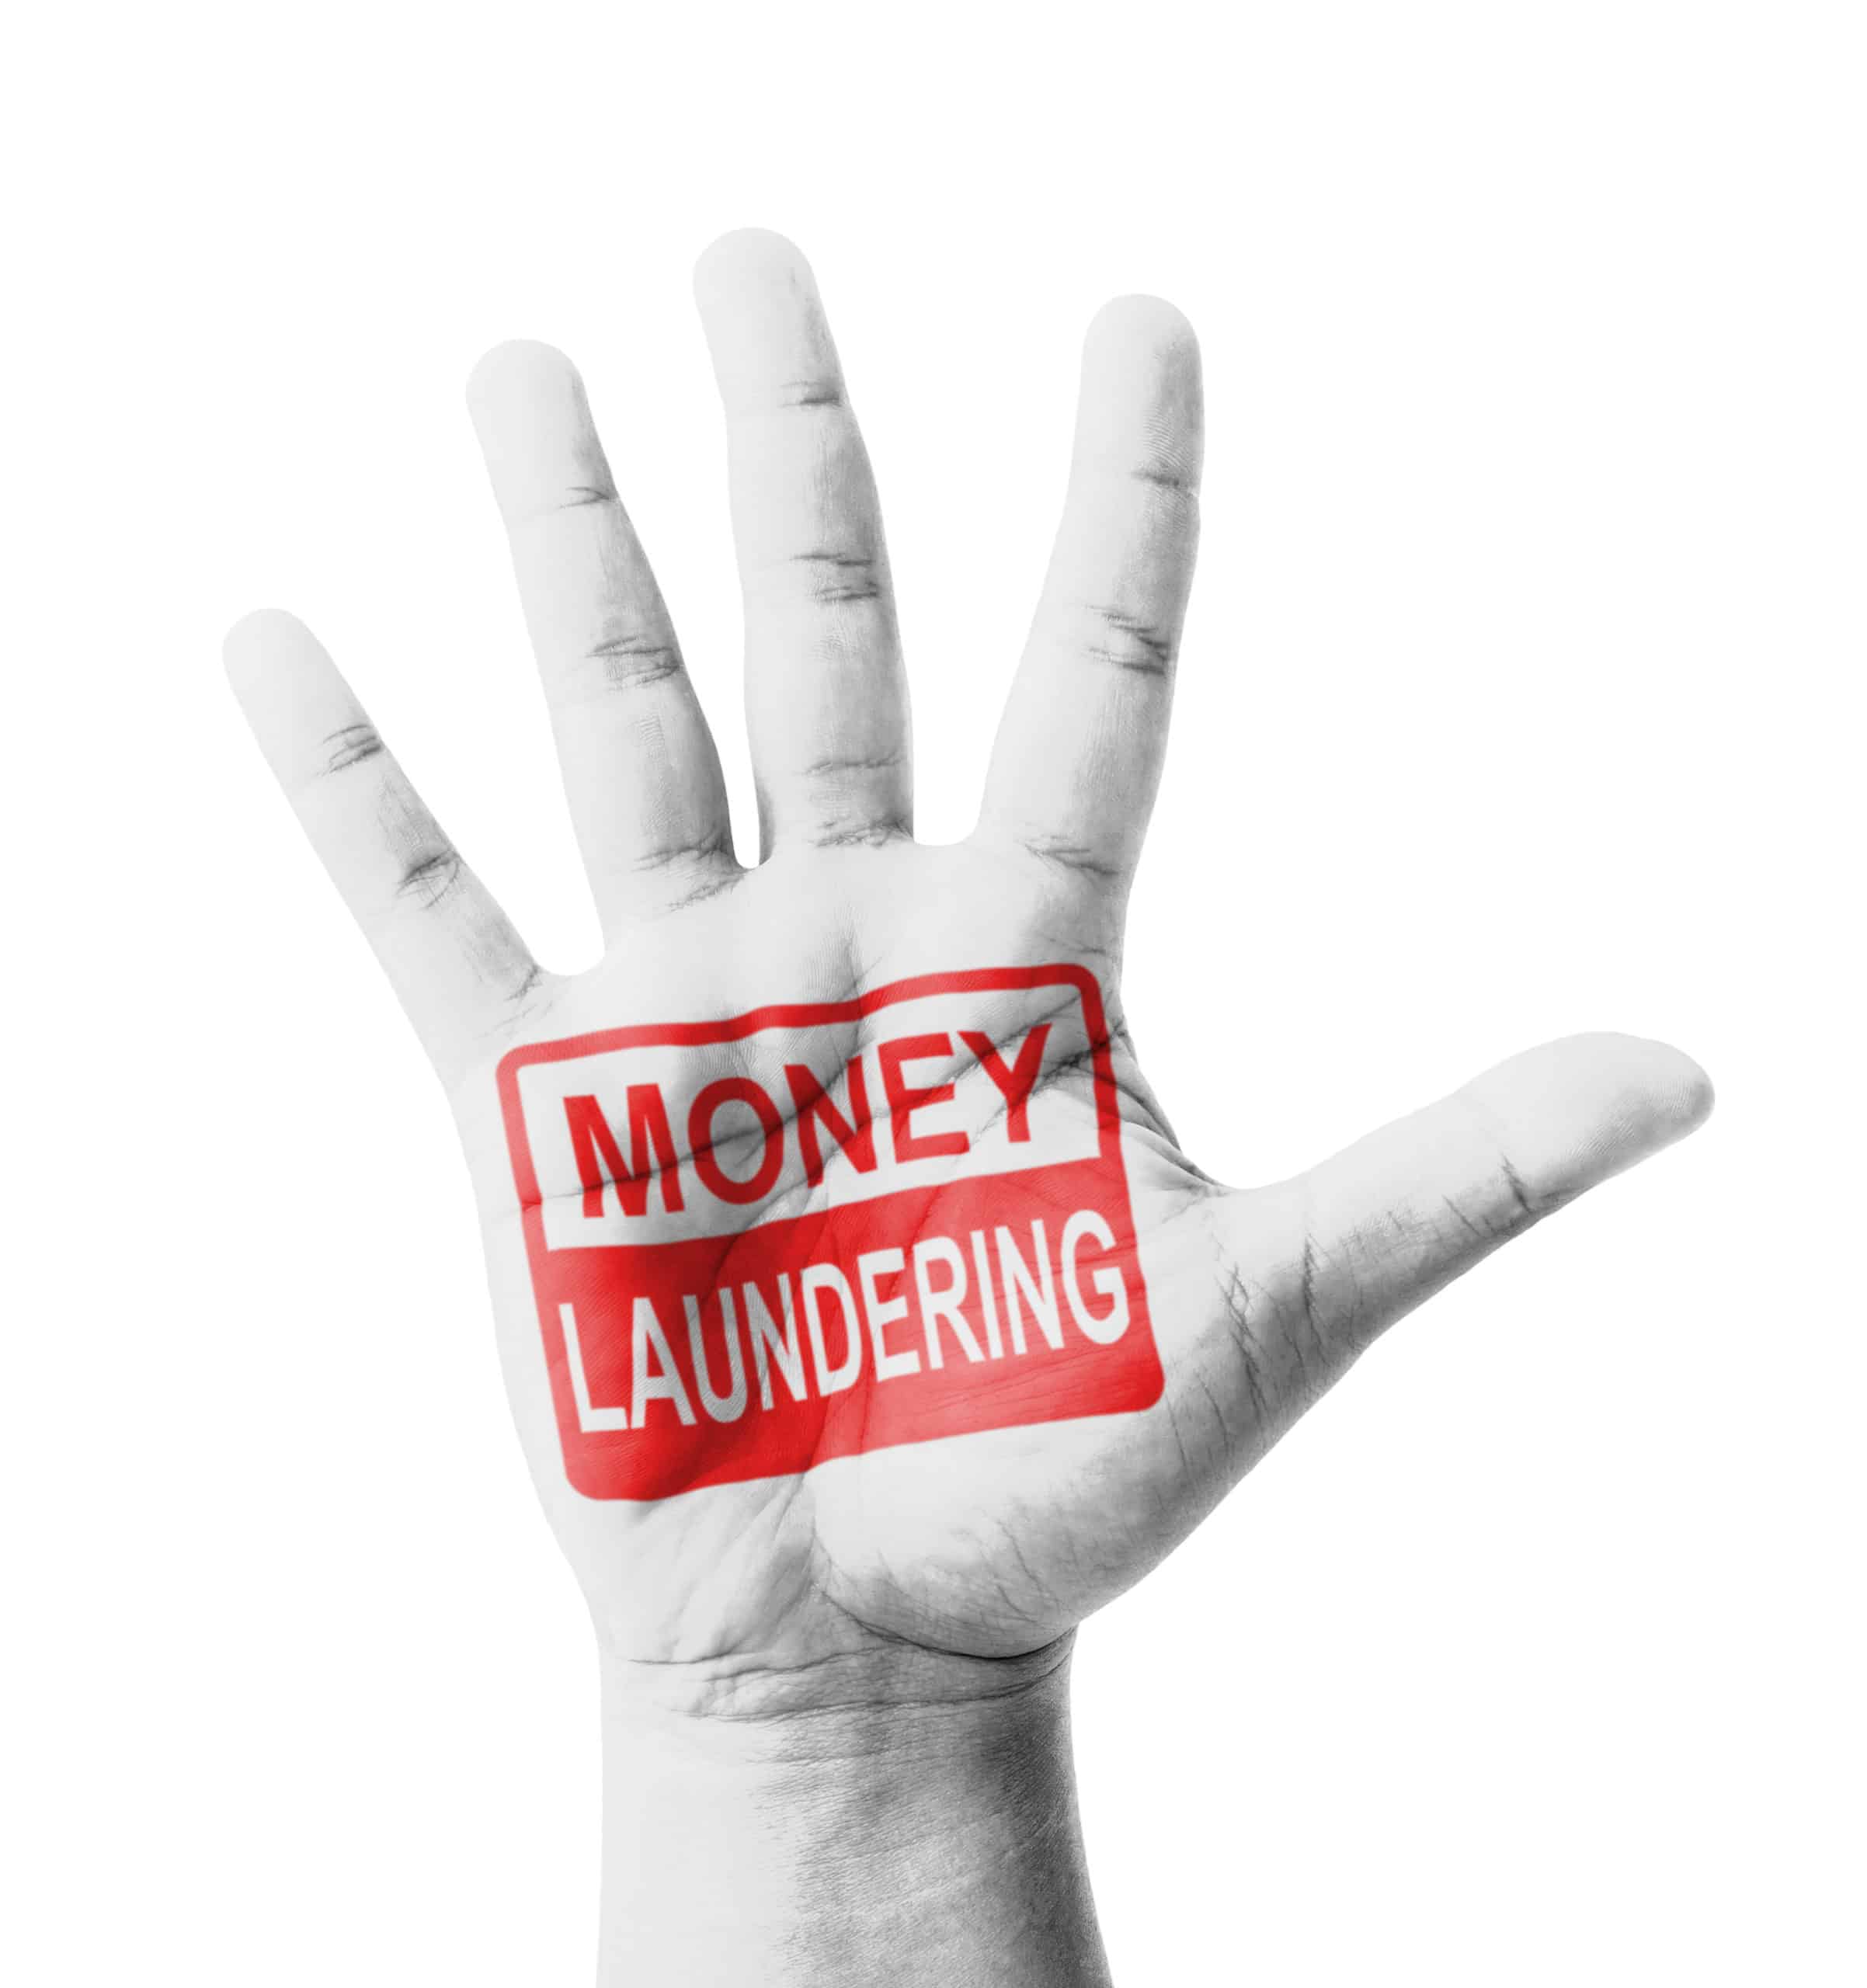 Don’t Look the Other Way! Learn How to Stop Money Laundering in Its Tracks